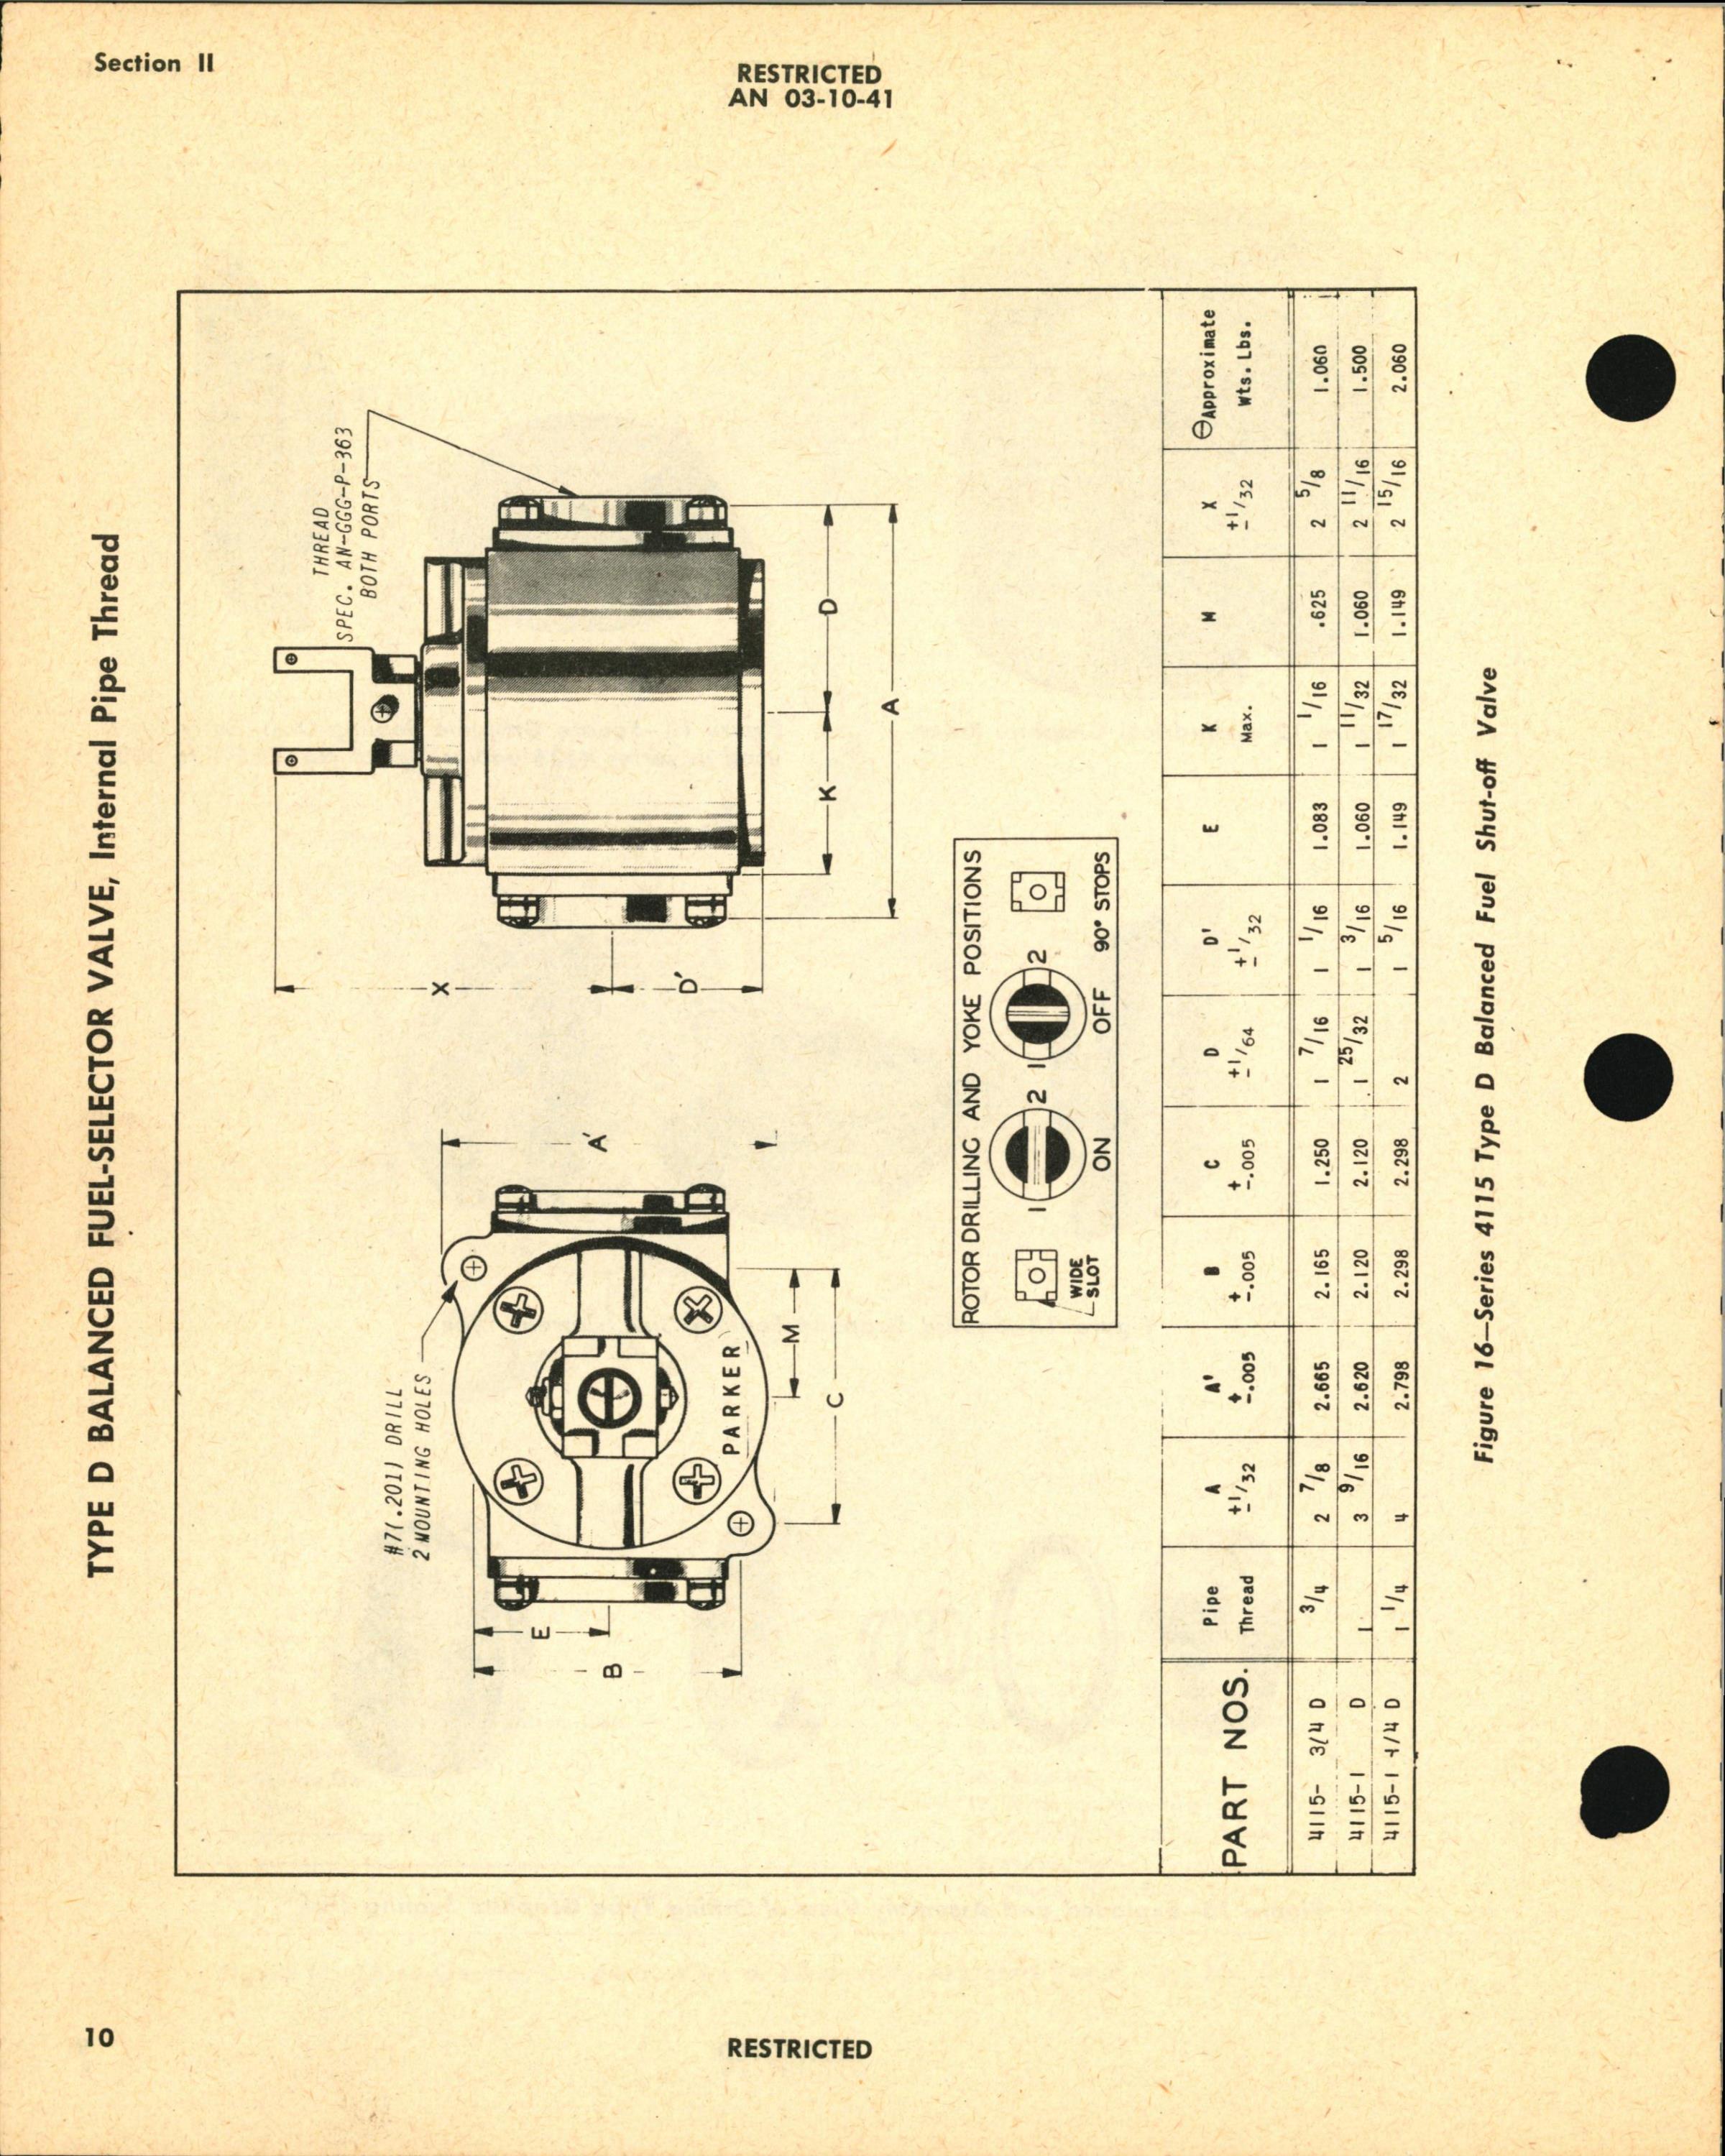 Sample page  16 from AirCorps Library document: Balanced Fuel Selector Valves - Operations, Service, Overhaul & Parts